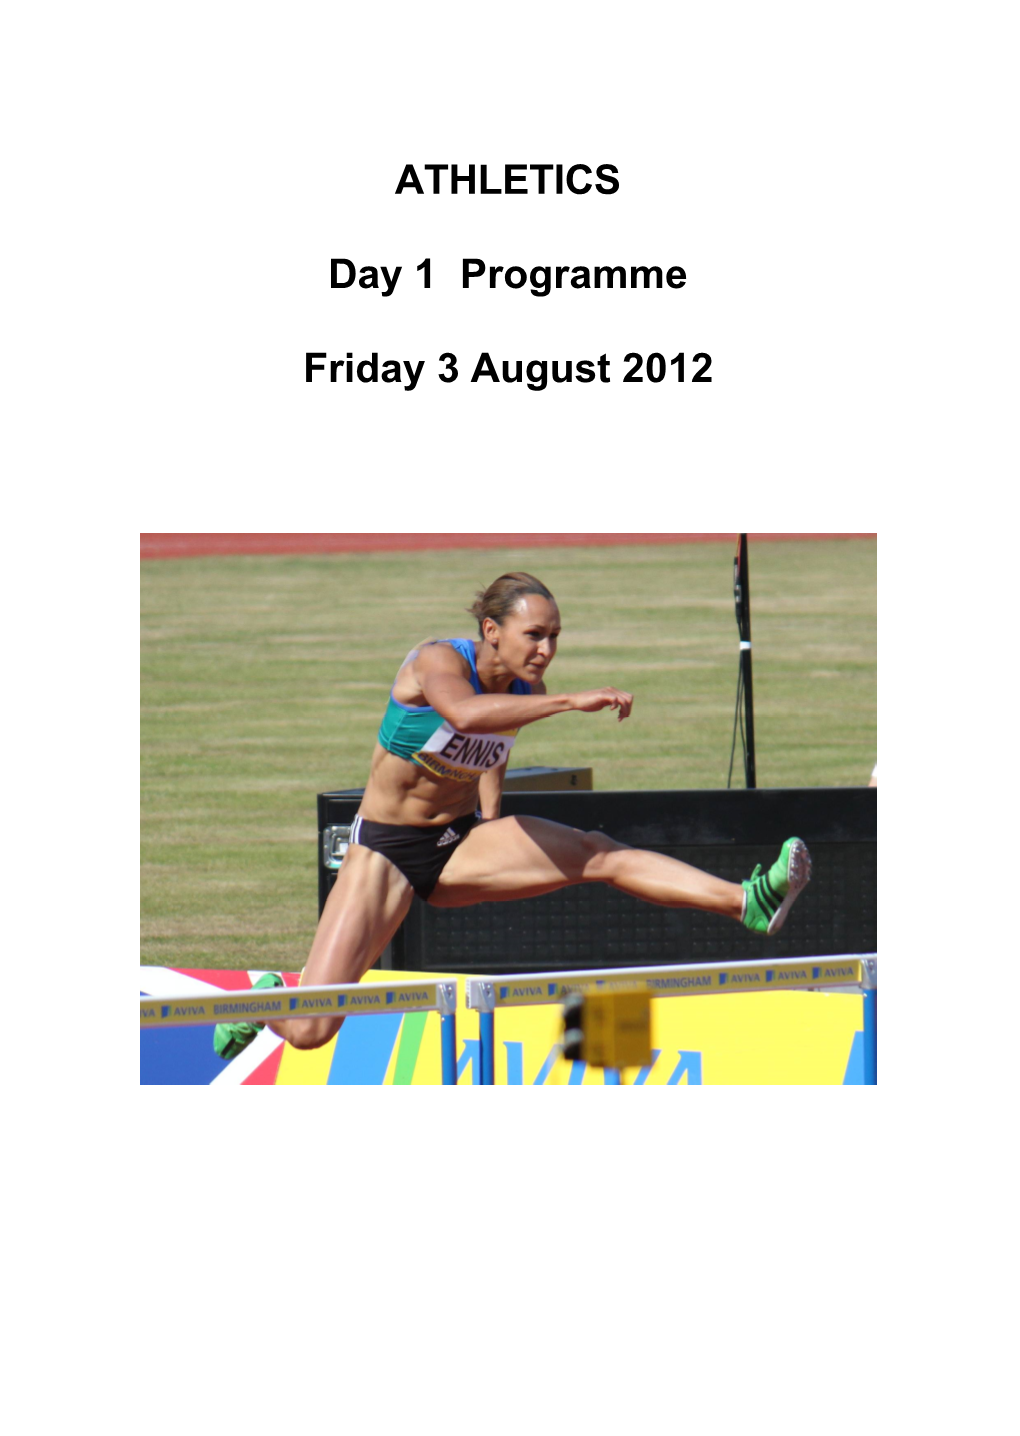 Day 1 Programme